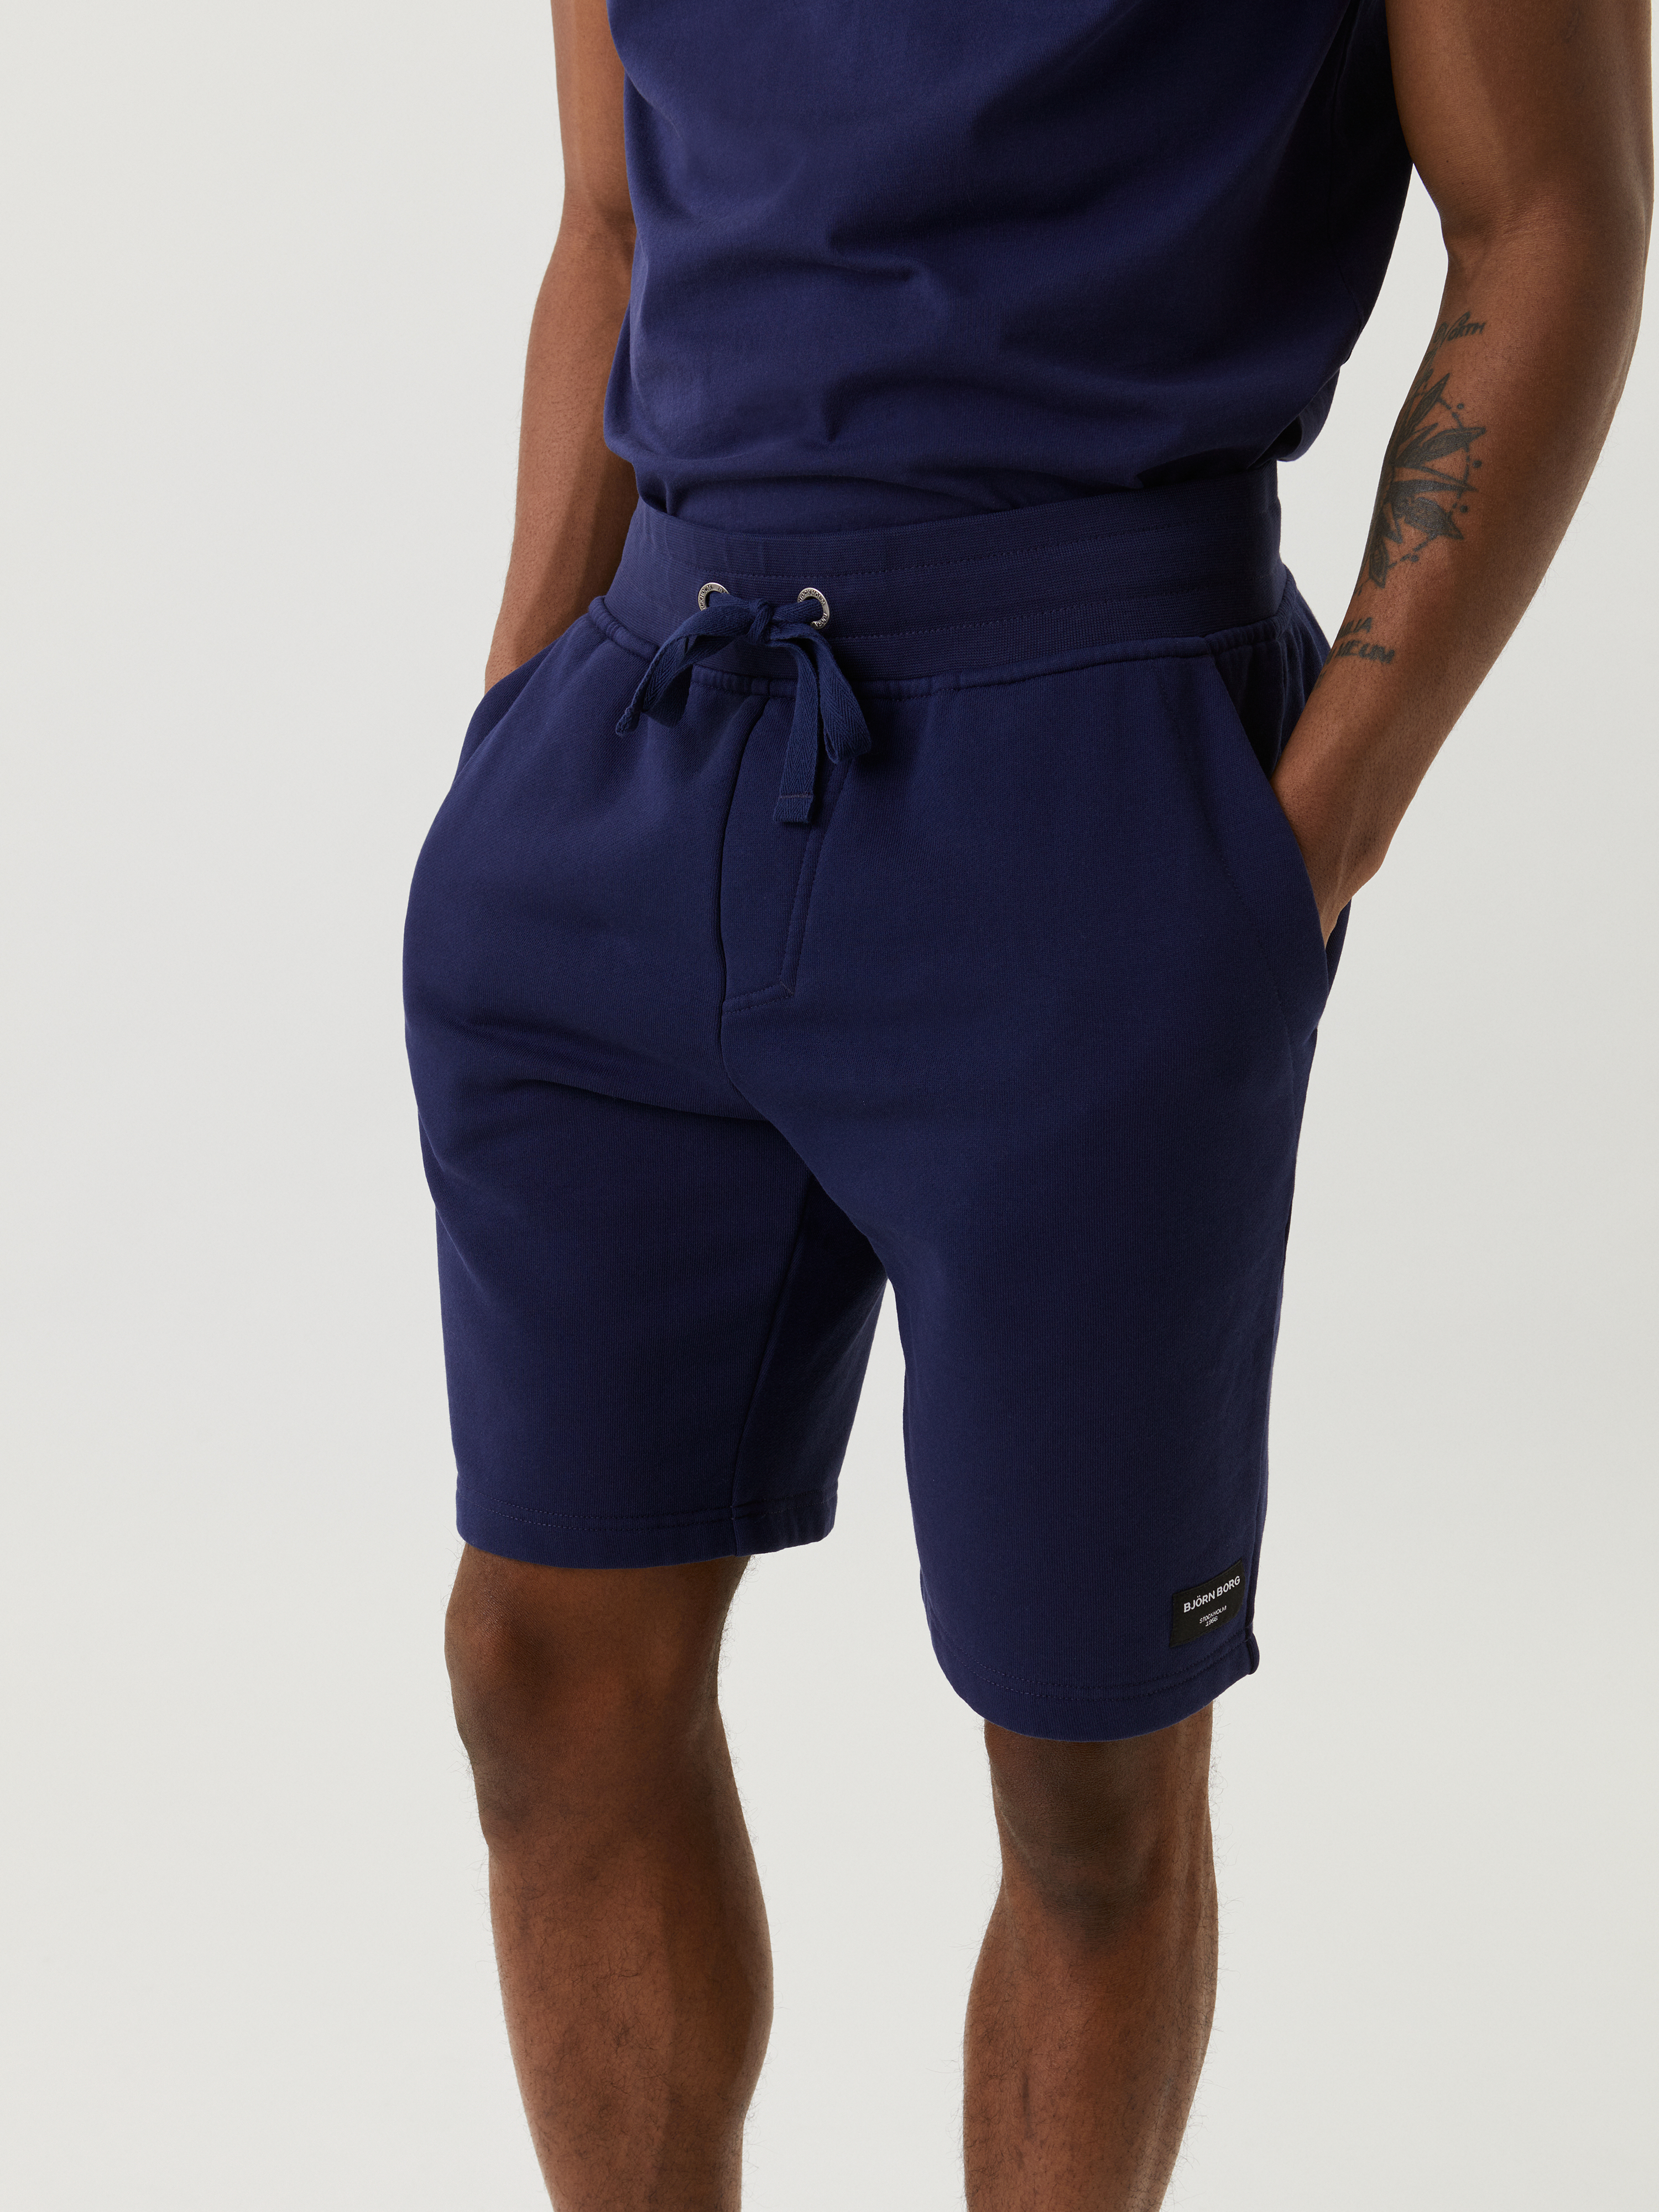  Centre Shorts, Washed Out Blue, L